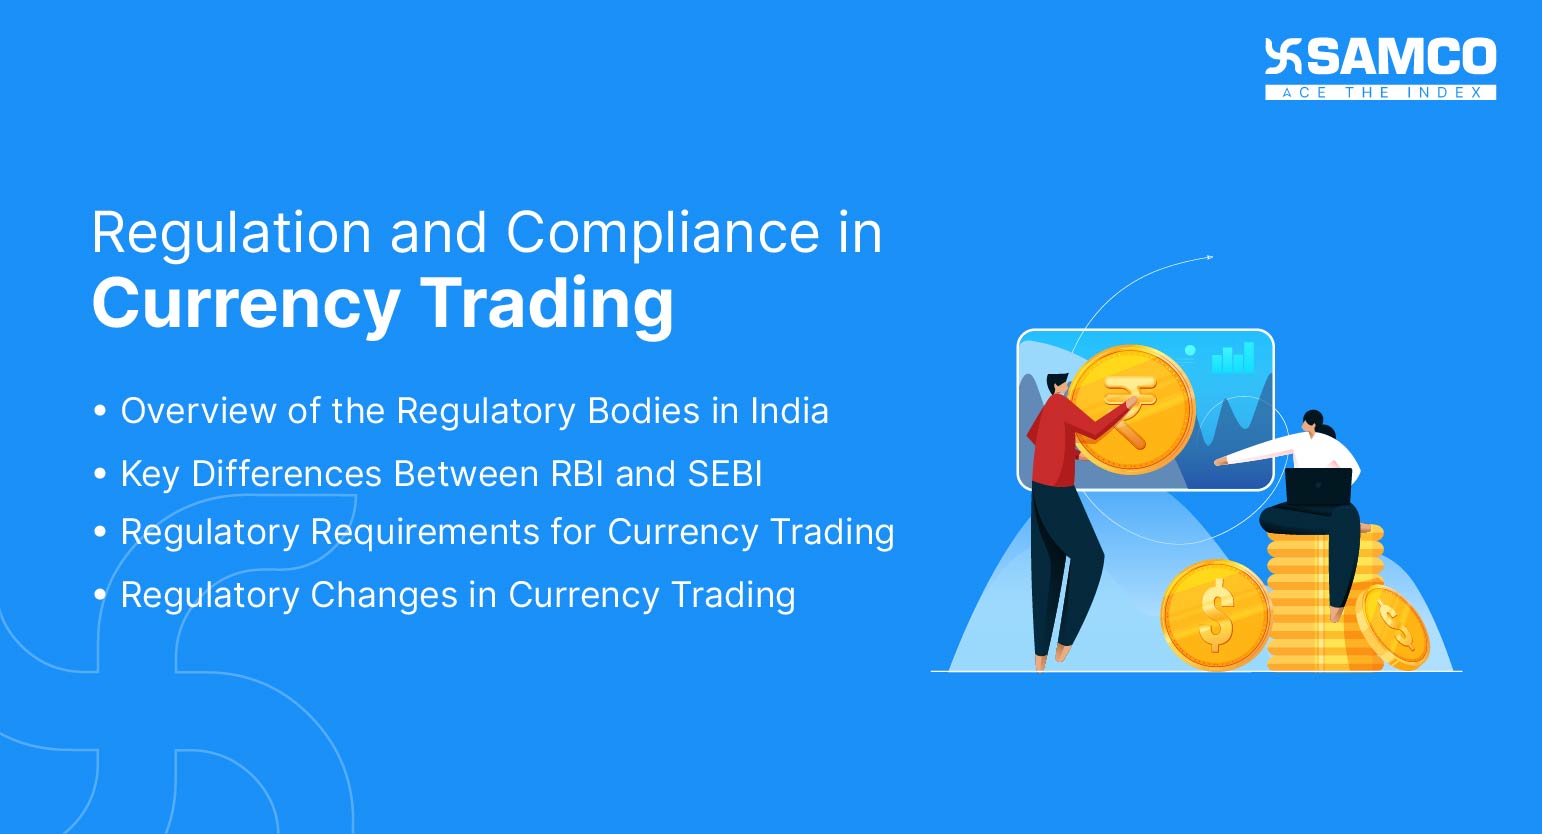 Regulations and Compliance in Currency Trading